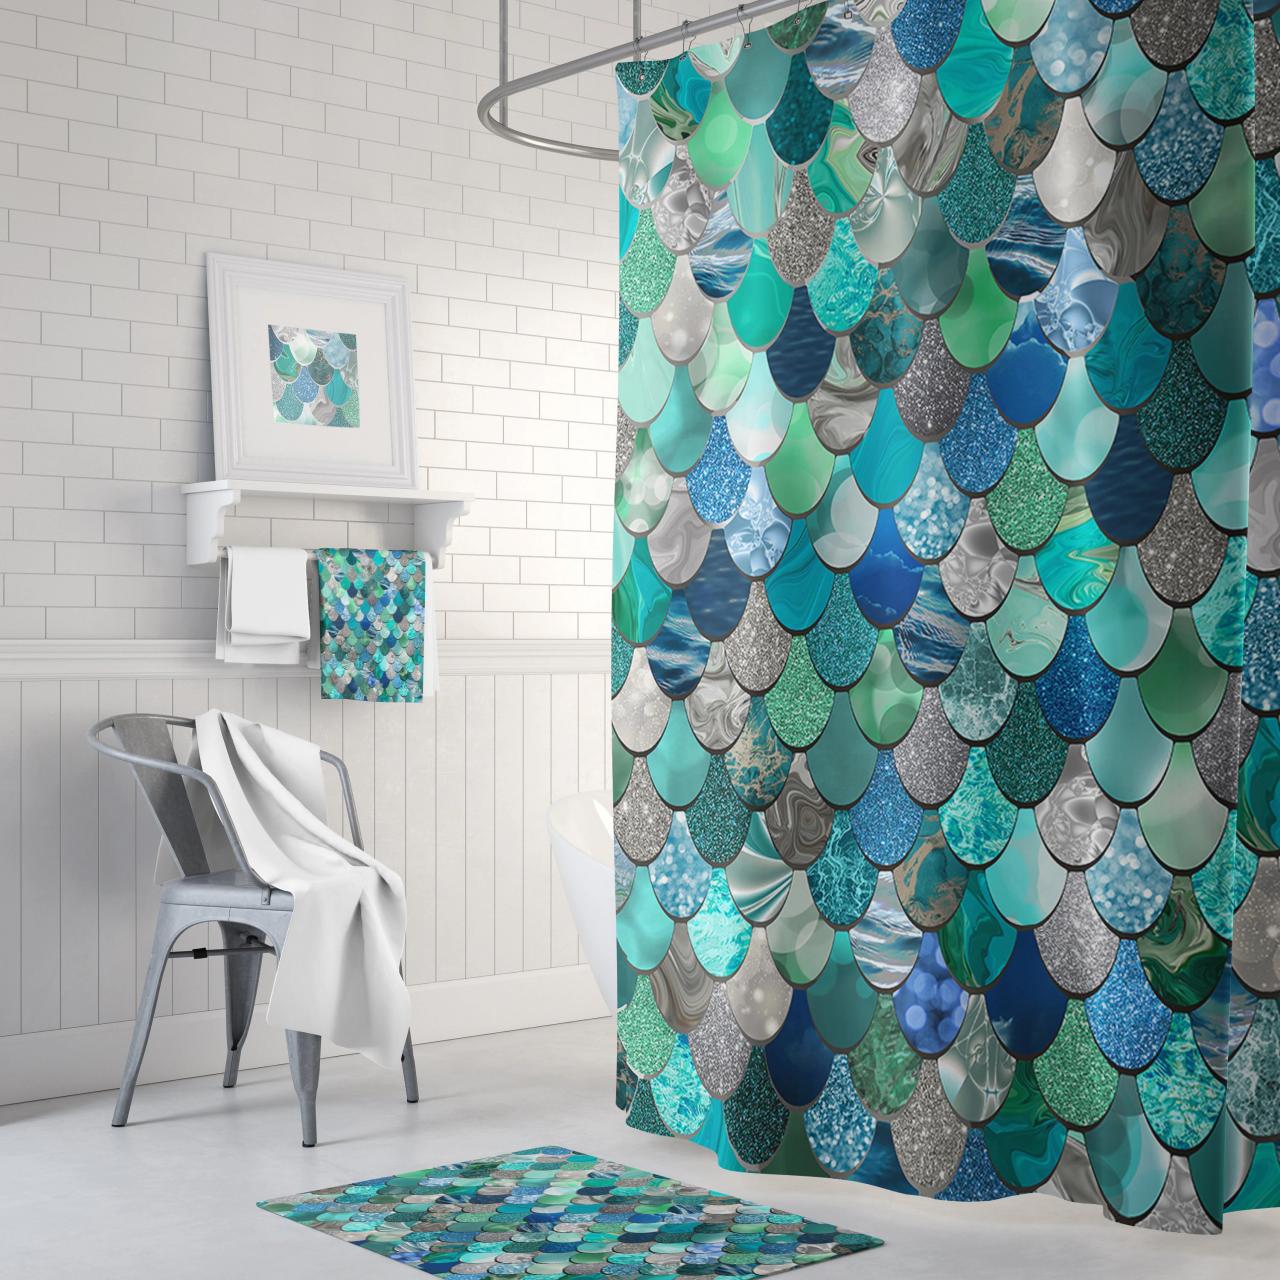 mermaid bathroom decor How To Design And Lay Out A Small Living Room